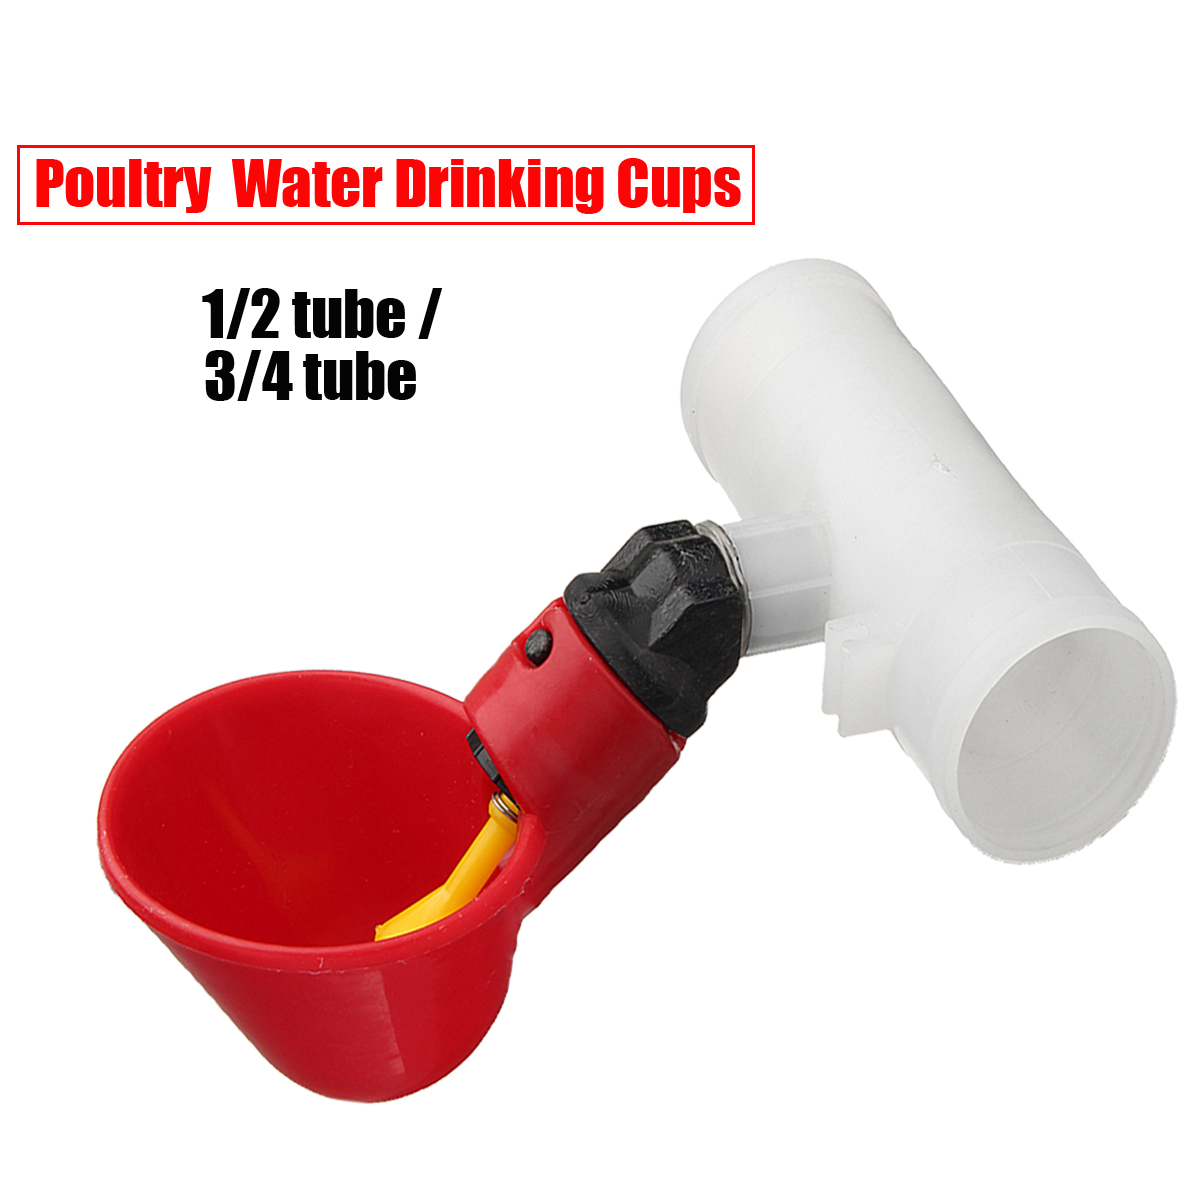 12--34-Poultry-Water-Drinking-Cups-Chicken-Hen-Adjustable-Automatic-Drinker-Drinks-Holder-1279916-2